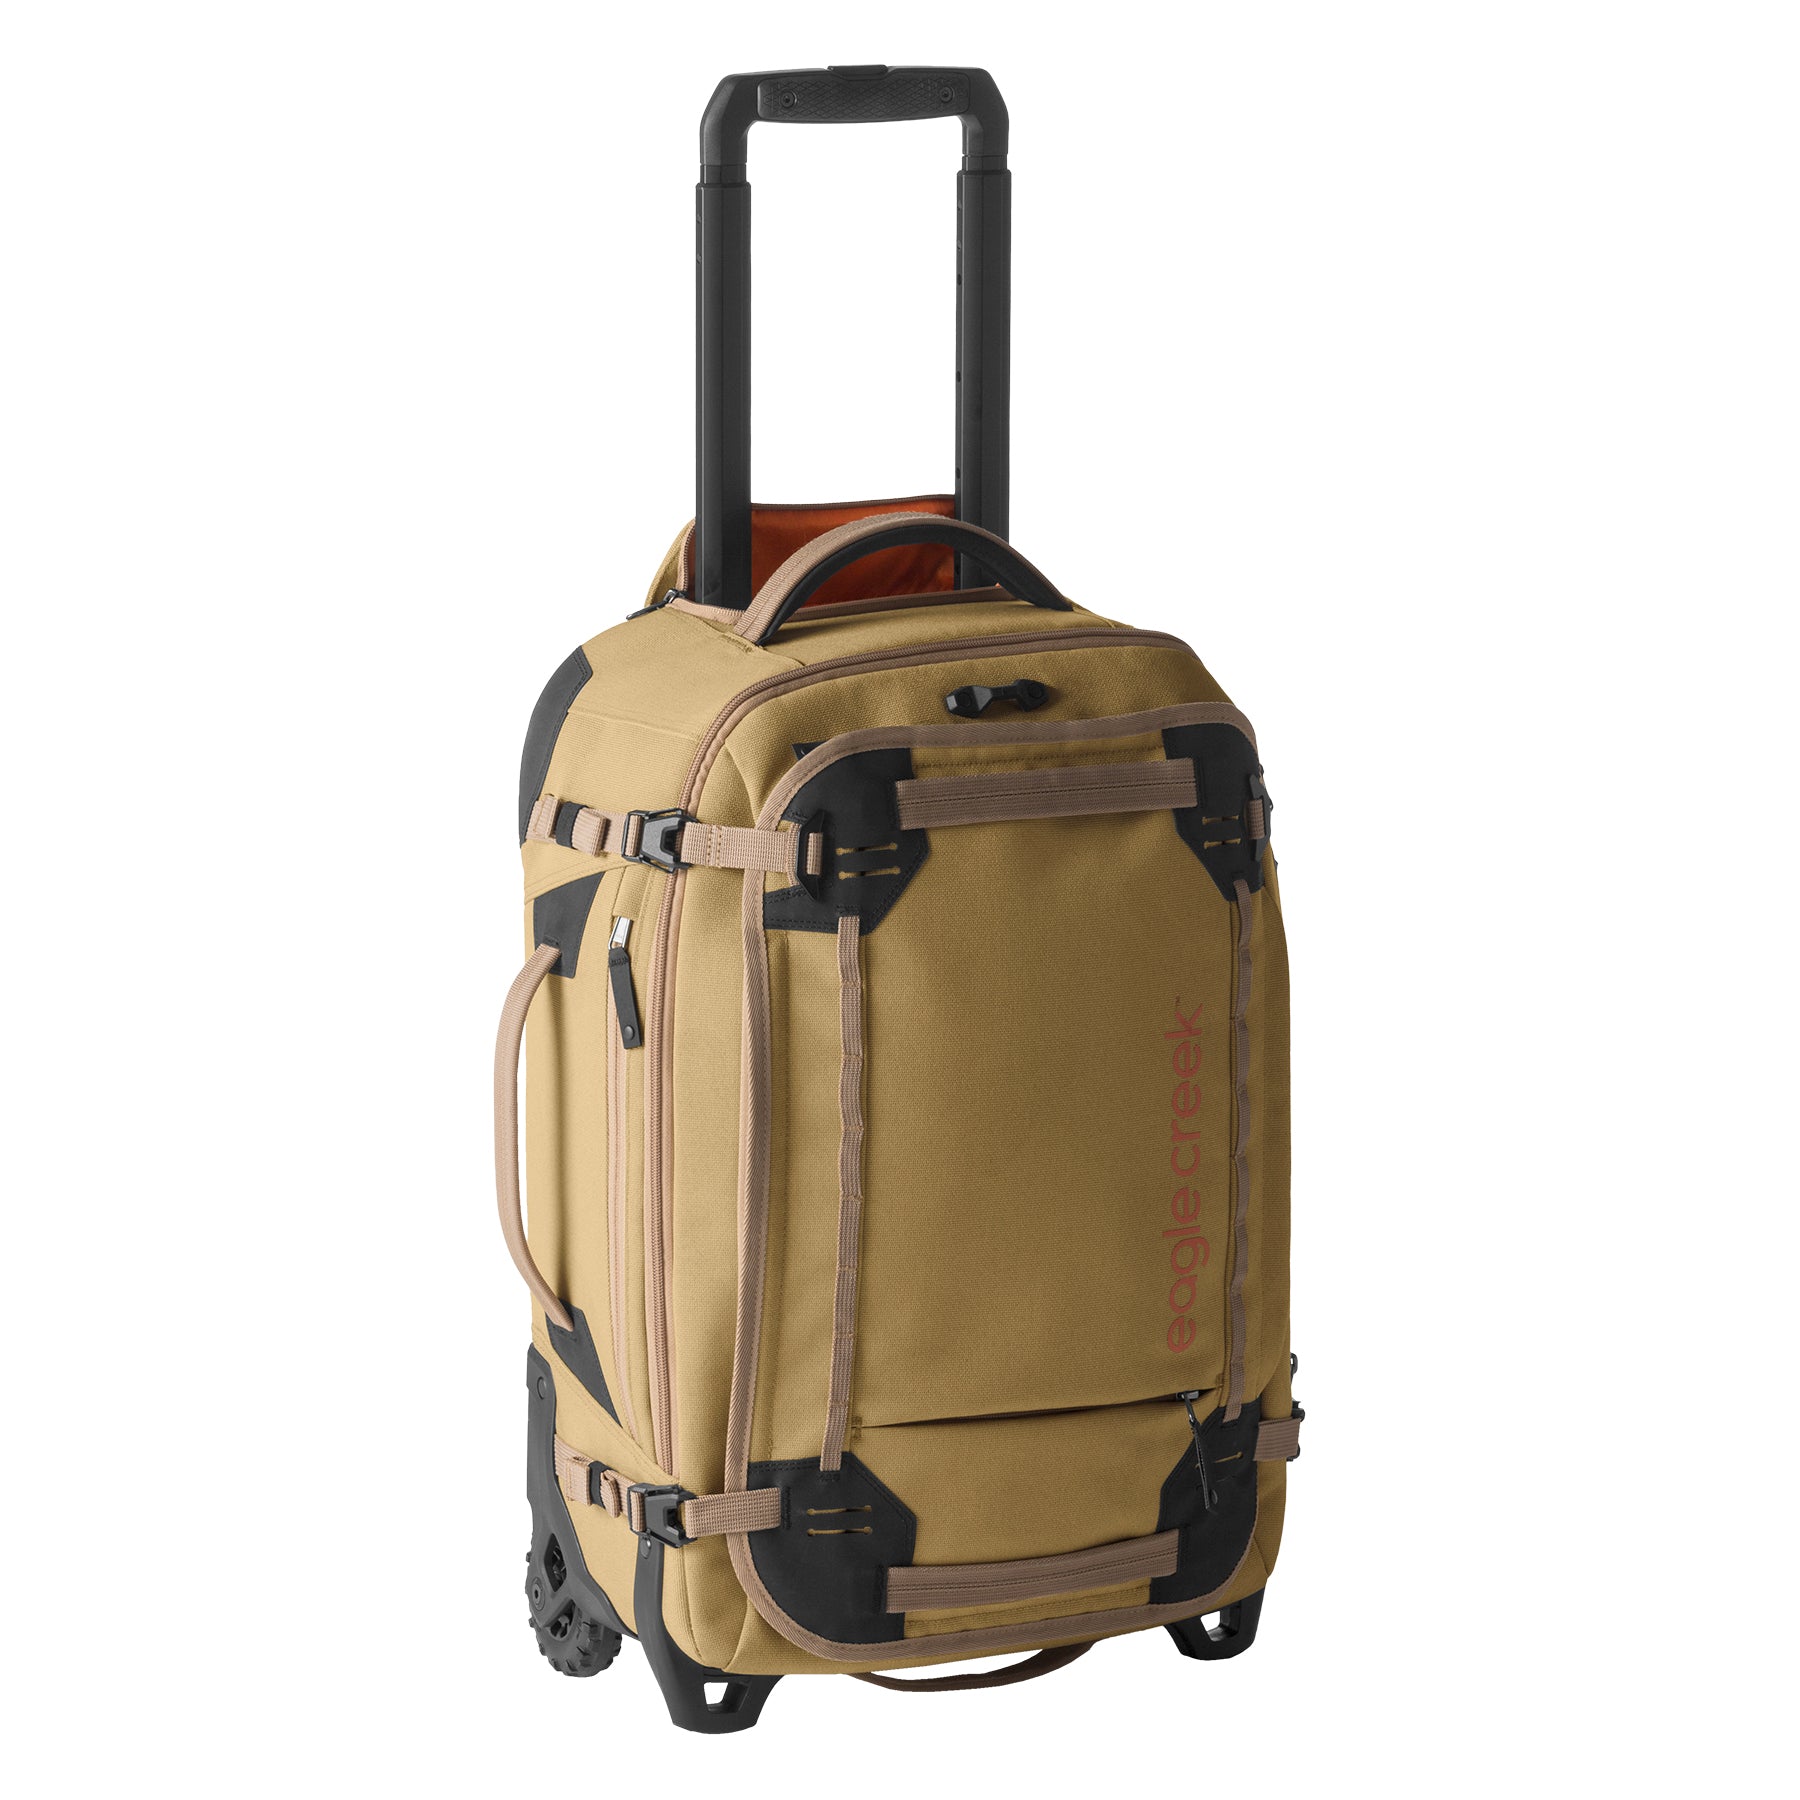 NASHER MILES Bruges Hard-Sided Polypropylene Luggage Set of 3 Teal Trolley  Bags (55, 65 & 75 cm) Check-in Suitcase 4 Wheels - 28 inch Teal - Price in  India | Flipkart.com